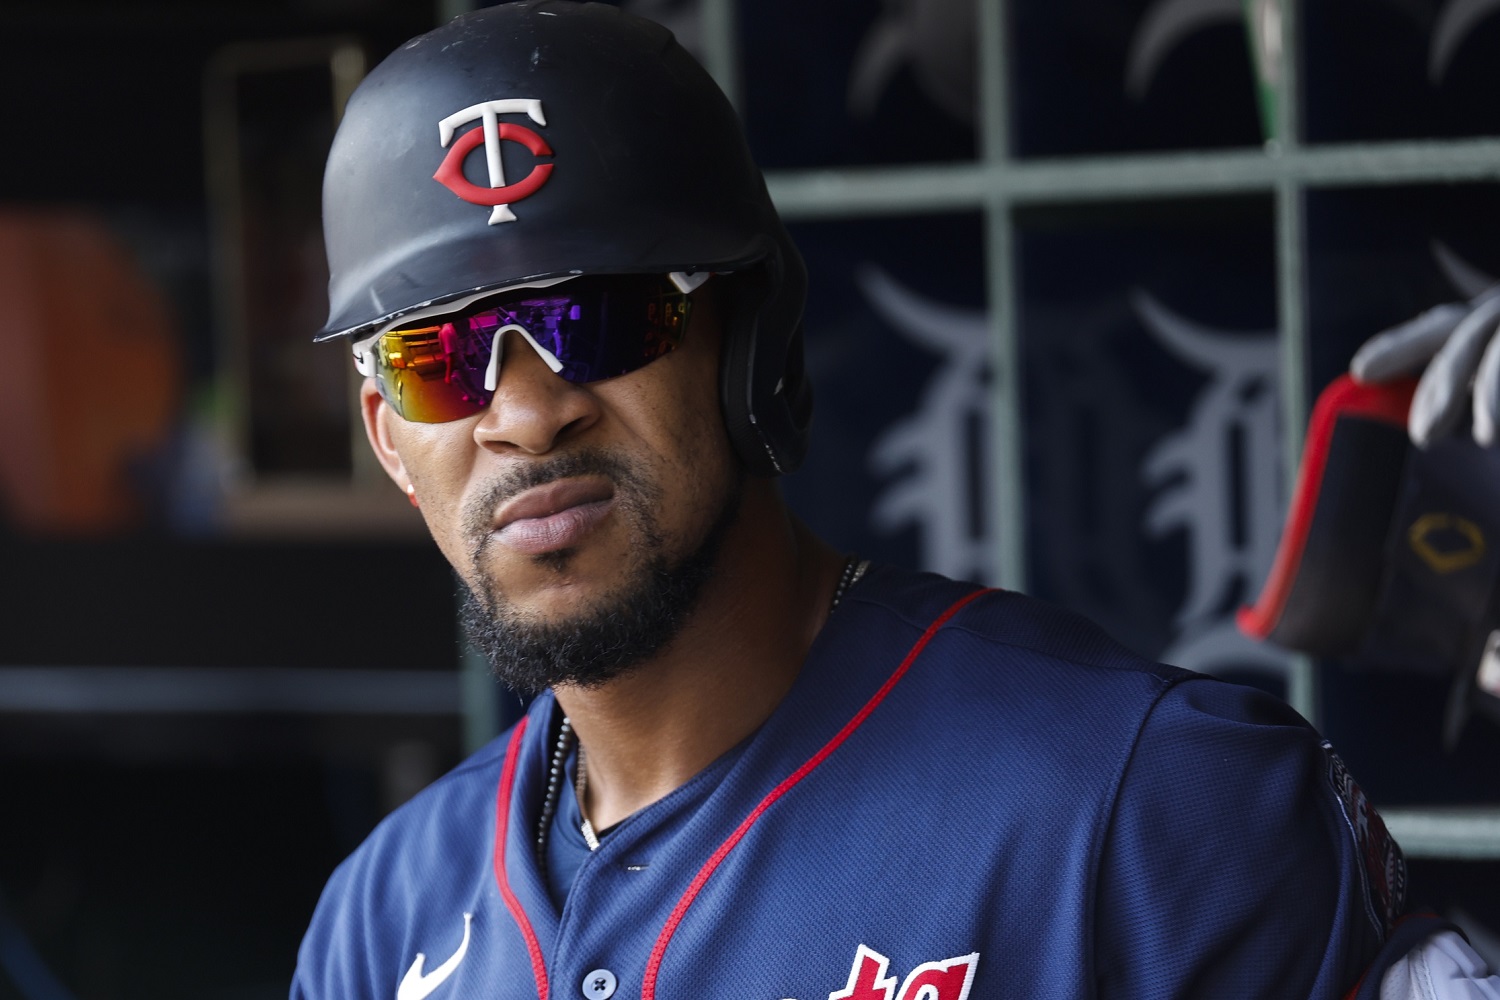 Byron Buxton for MVP? - Off The Bench